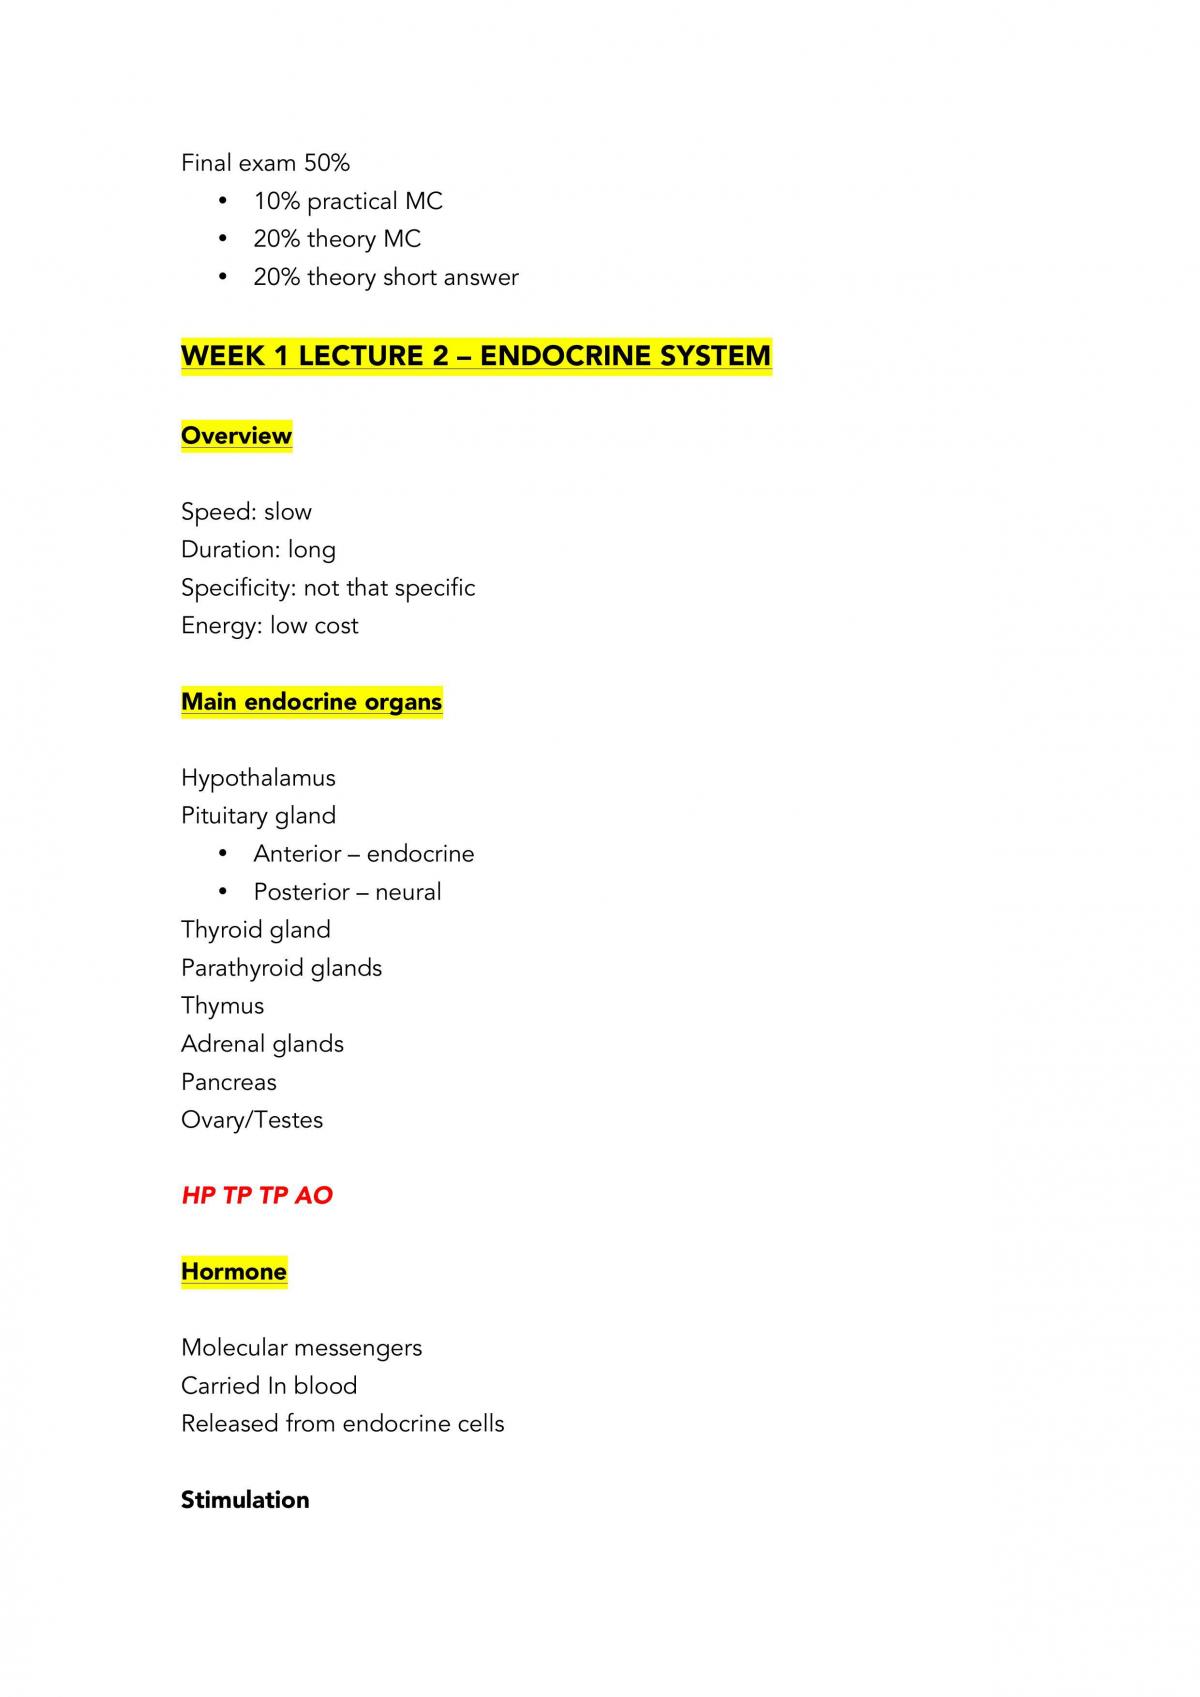 Human Physiology 2 Module 1 4 Notes Biol2044 Human Physiology 2 Body Systems Rmit Thinkswap 4345